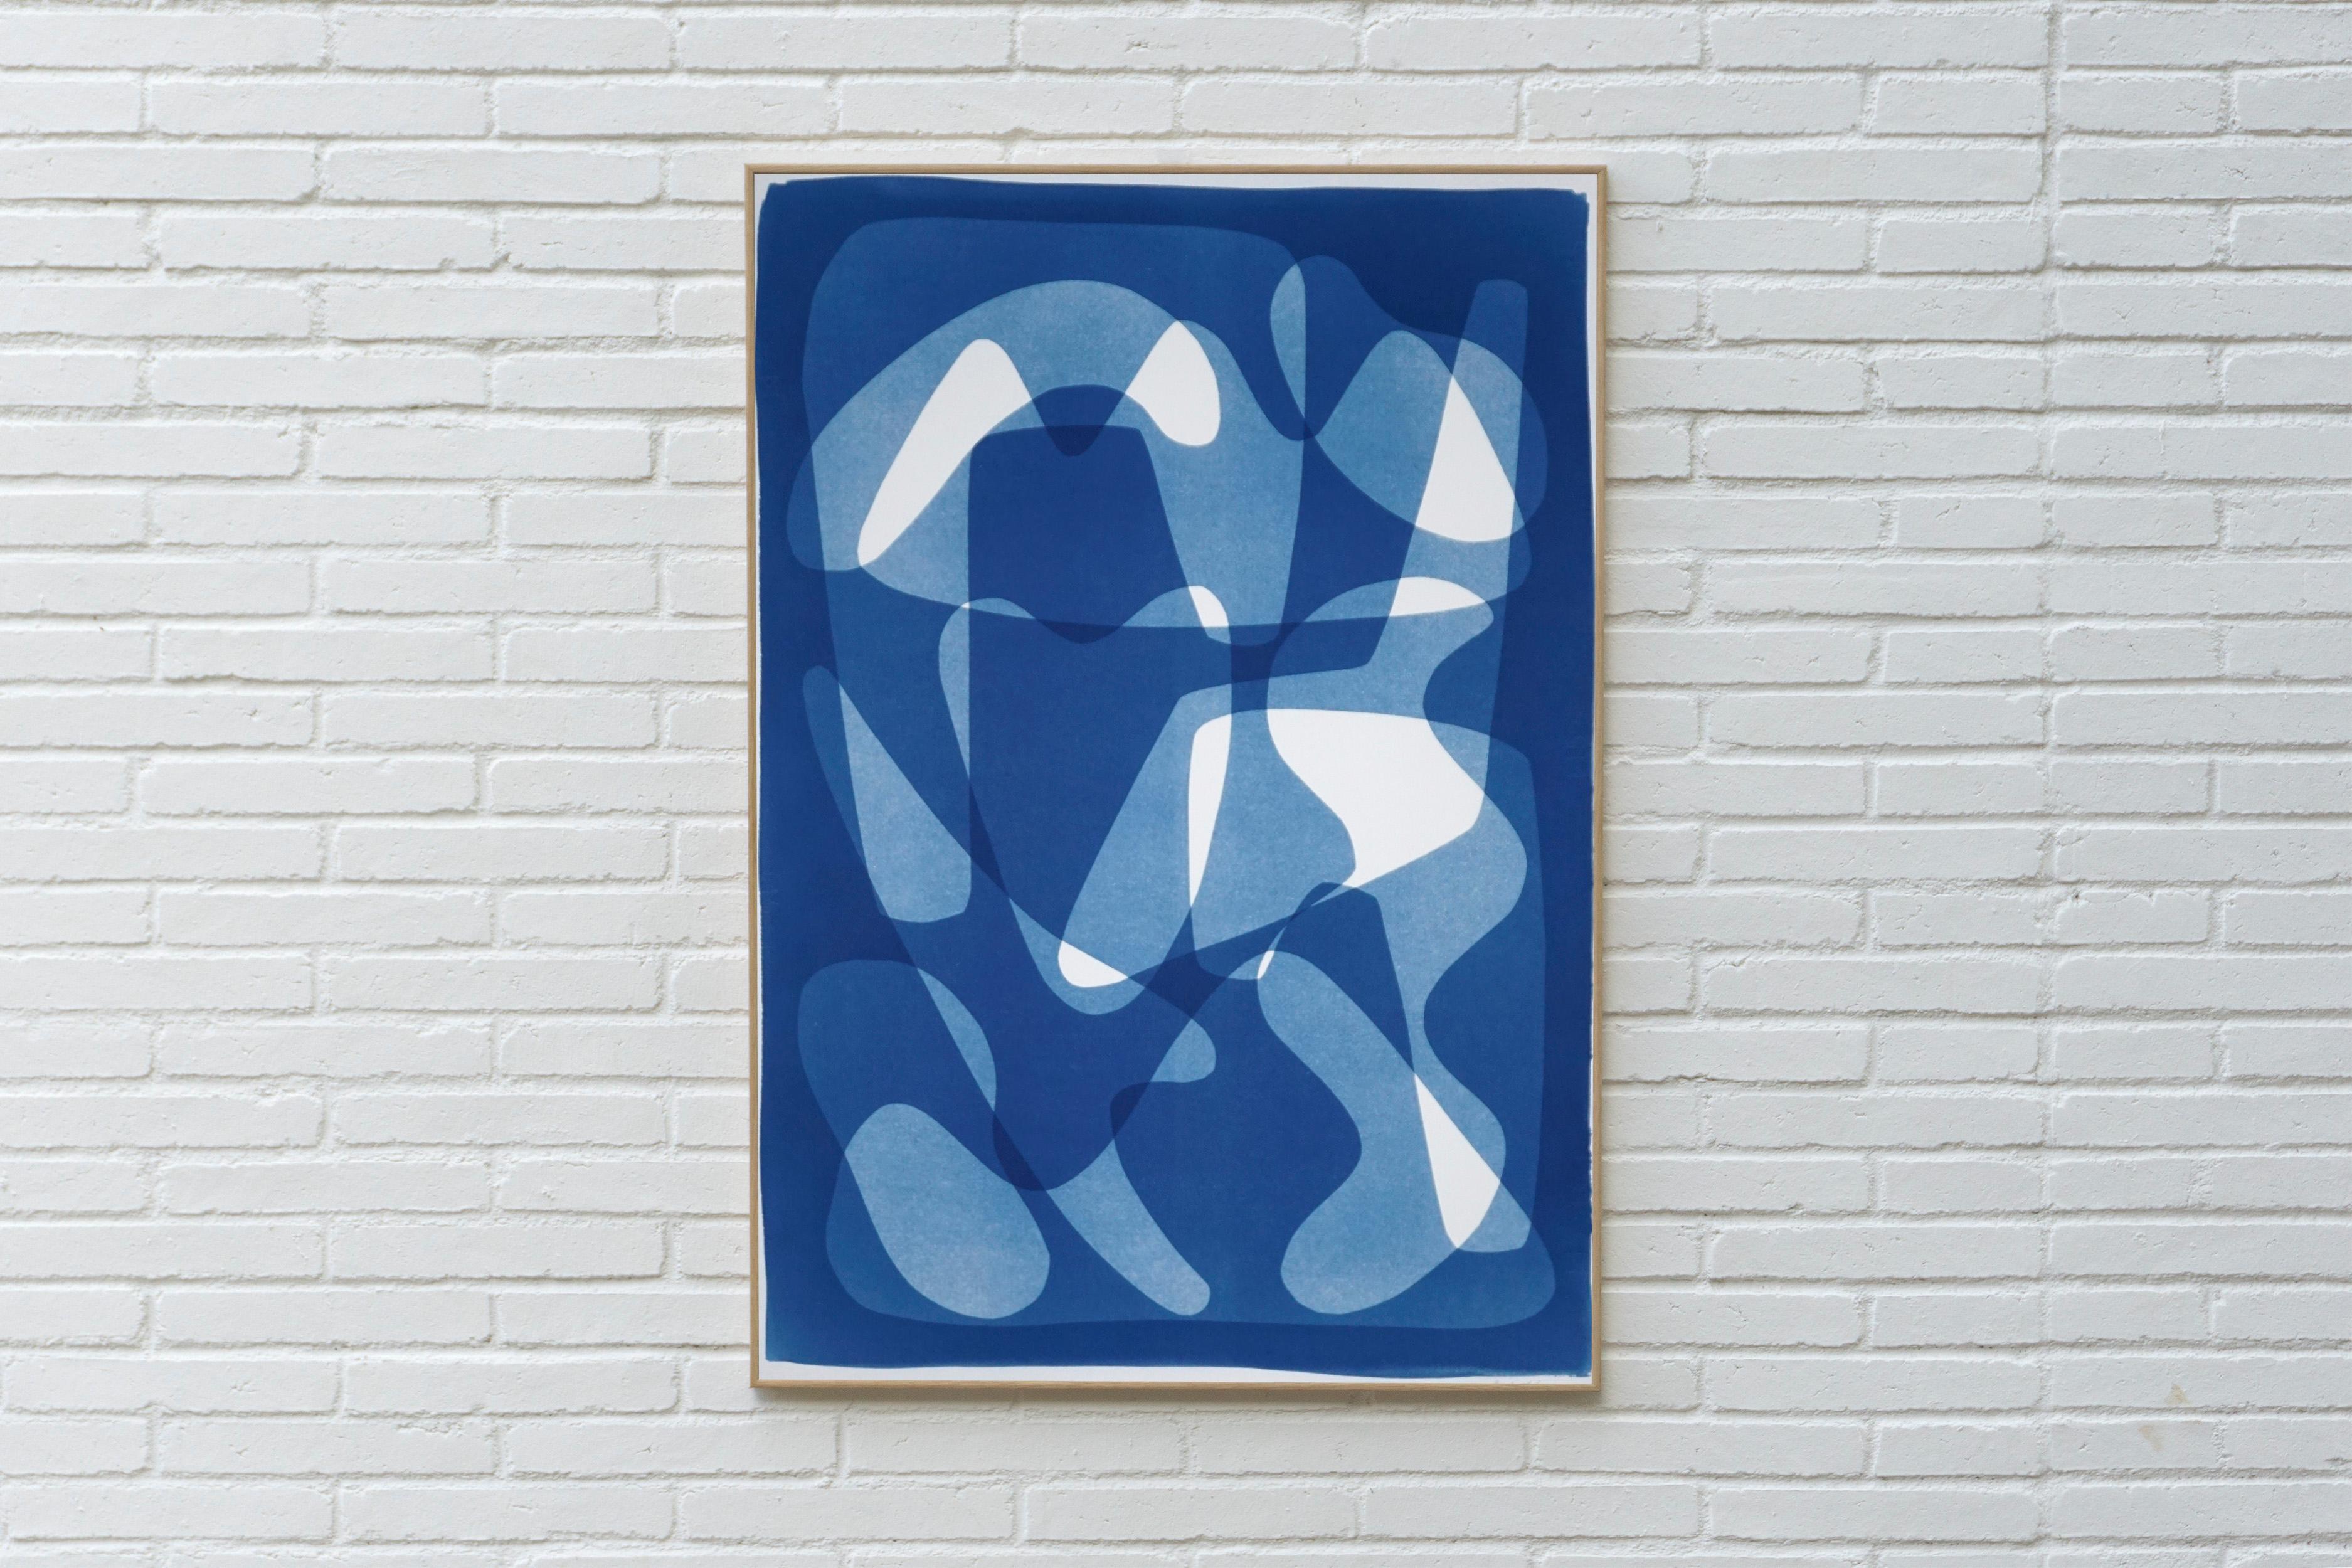 Geometric Mid-Century Vibes, Blue Tones Cyanotype Print, Cutout Shapes on Paper - Photograph by Kind of Cyan